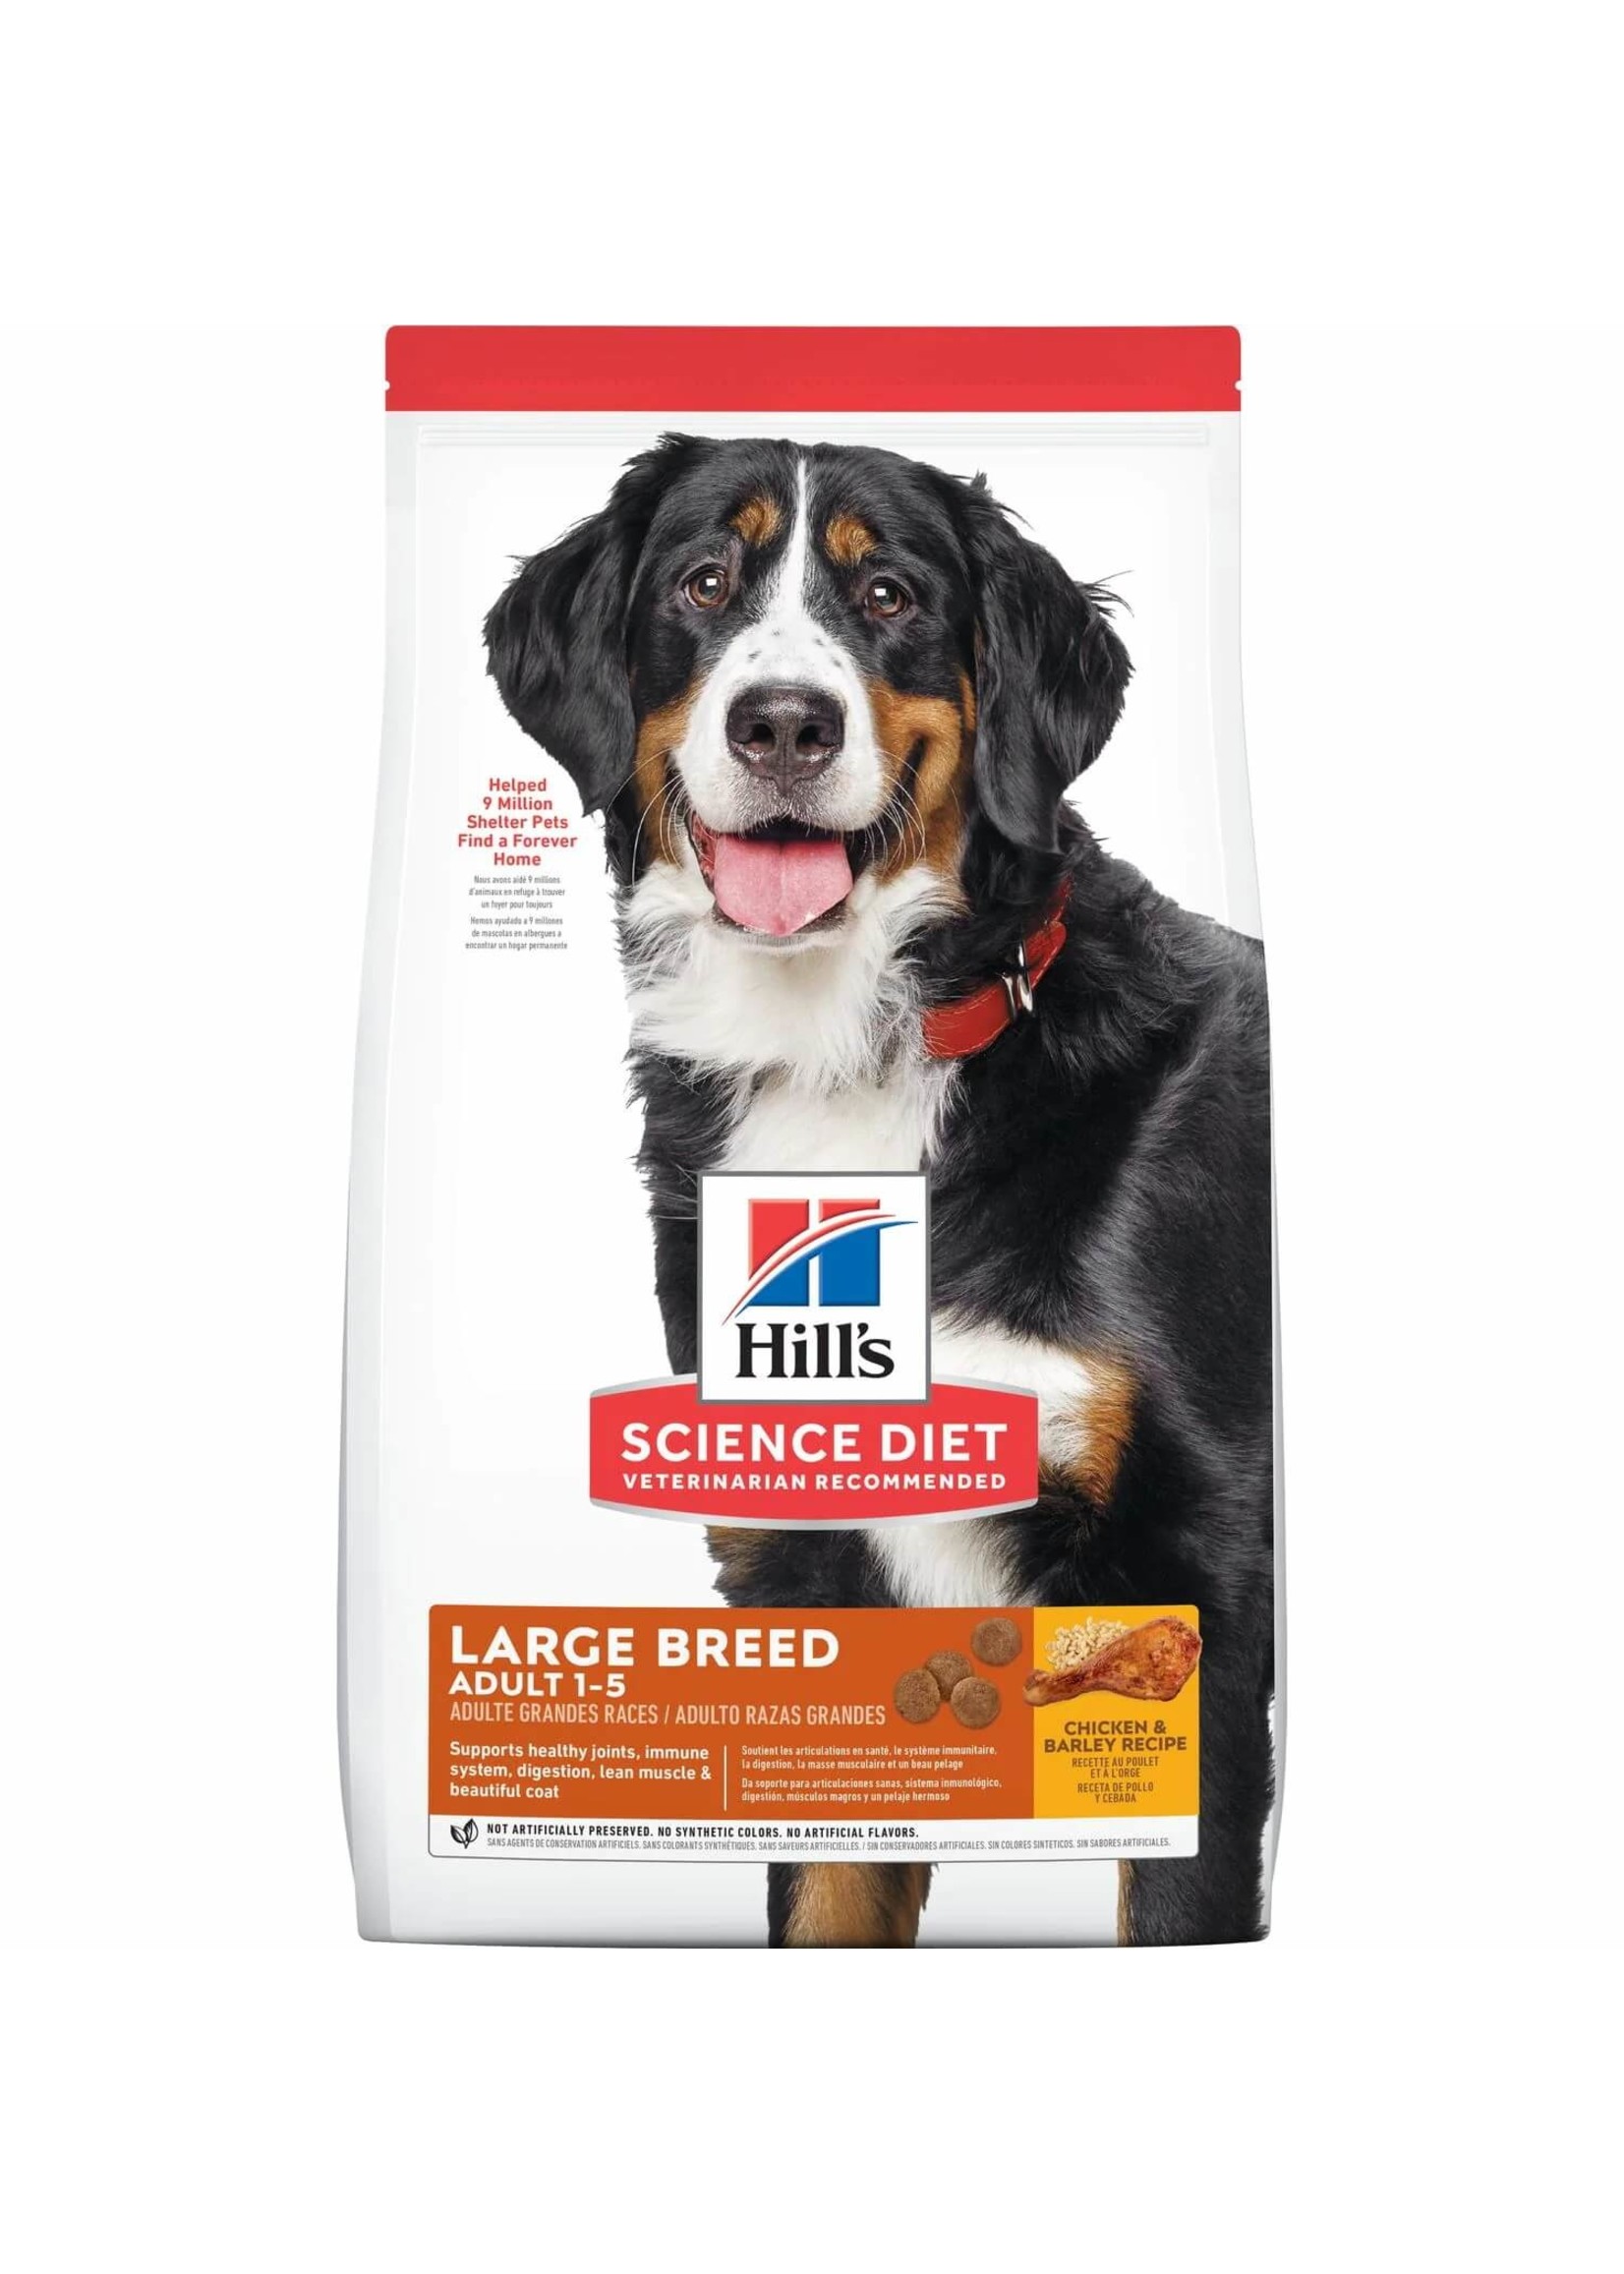 Hill's Science Diet Hill's Science Diet Adult Large Breed Dry Dog Food, Chicken & Barley Recipe, 35 lb Bag